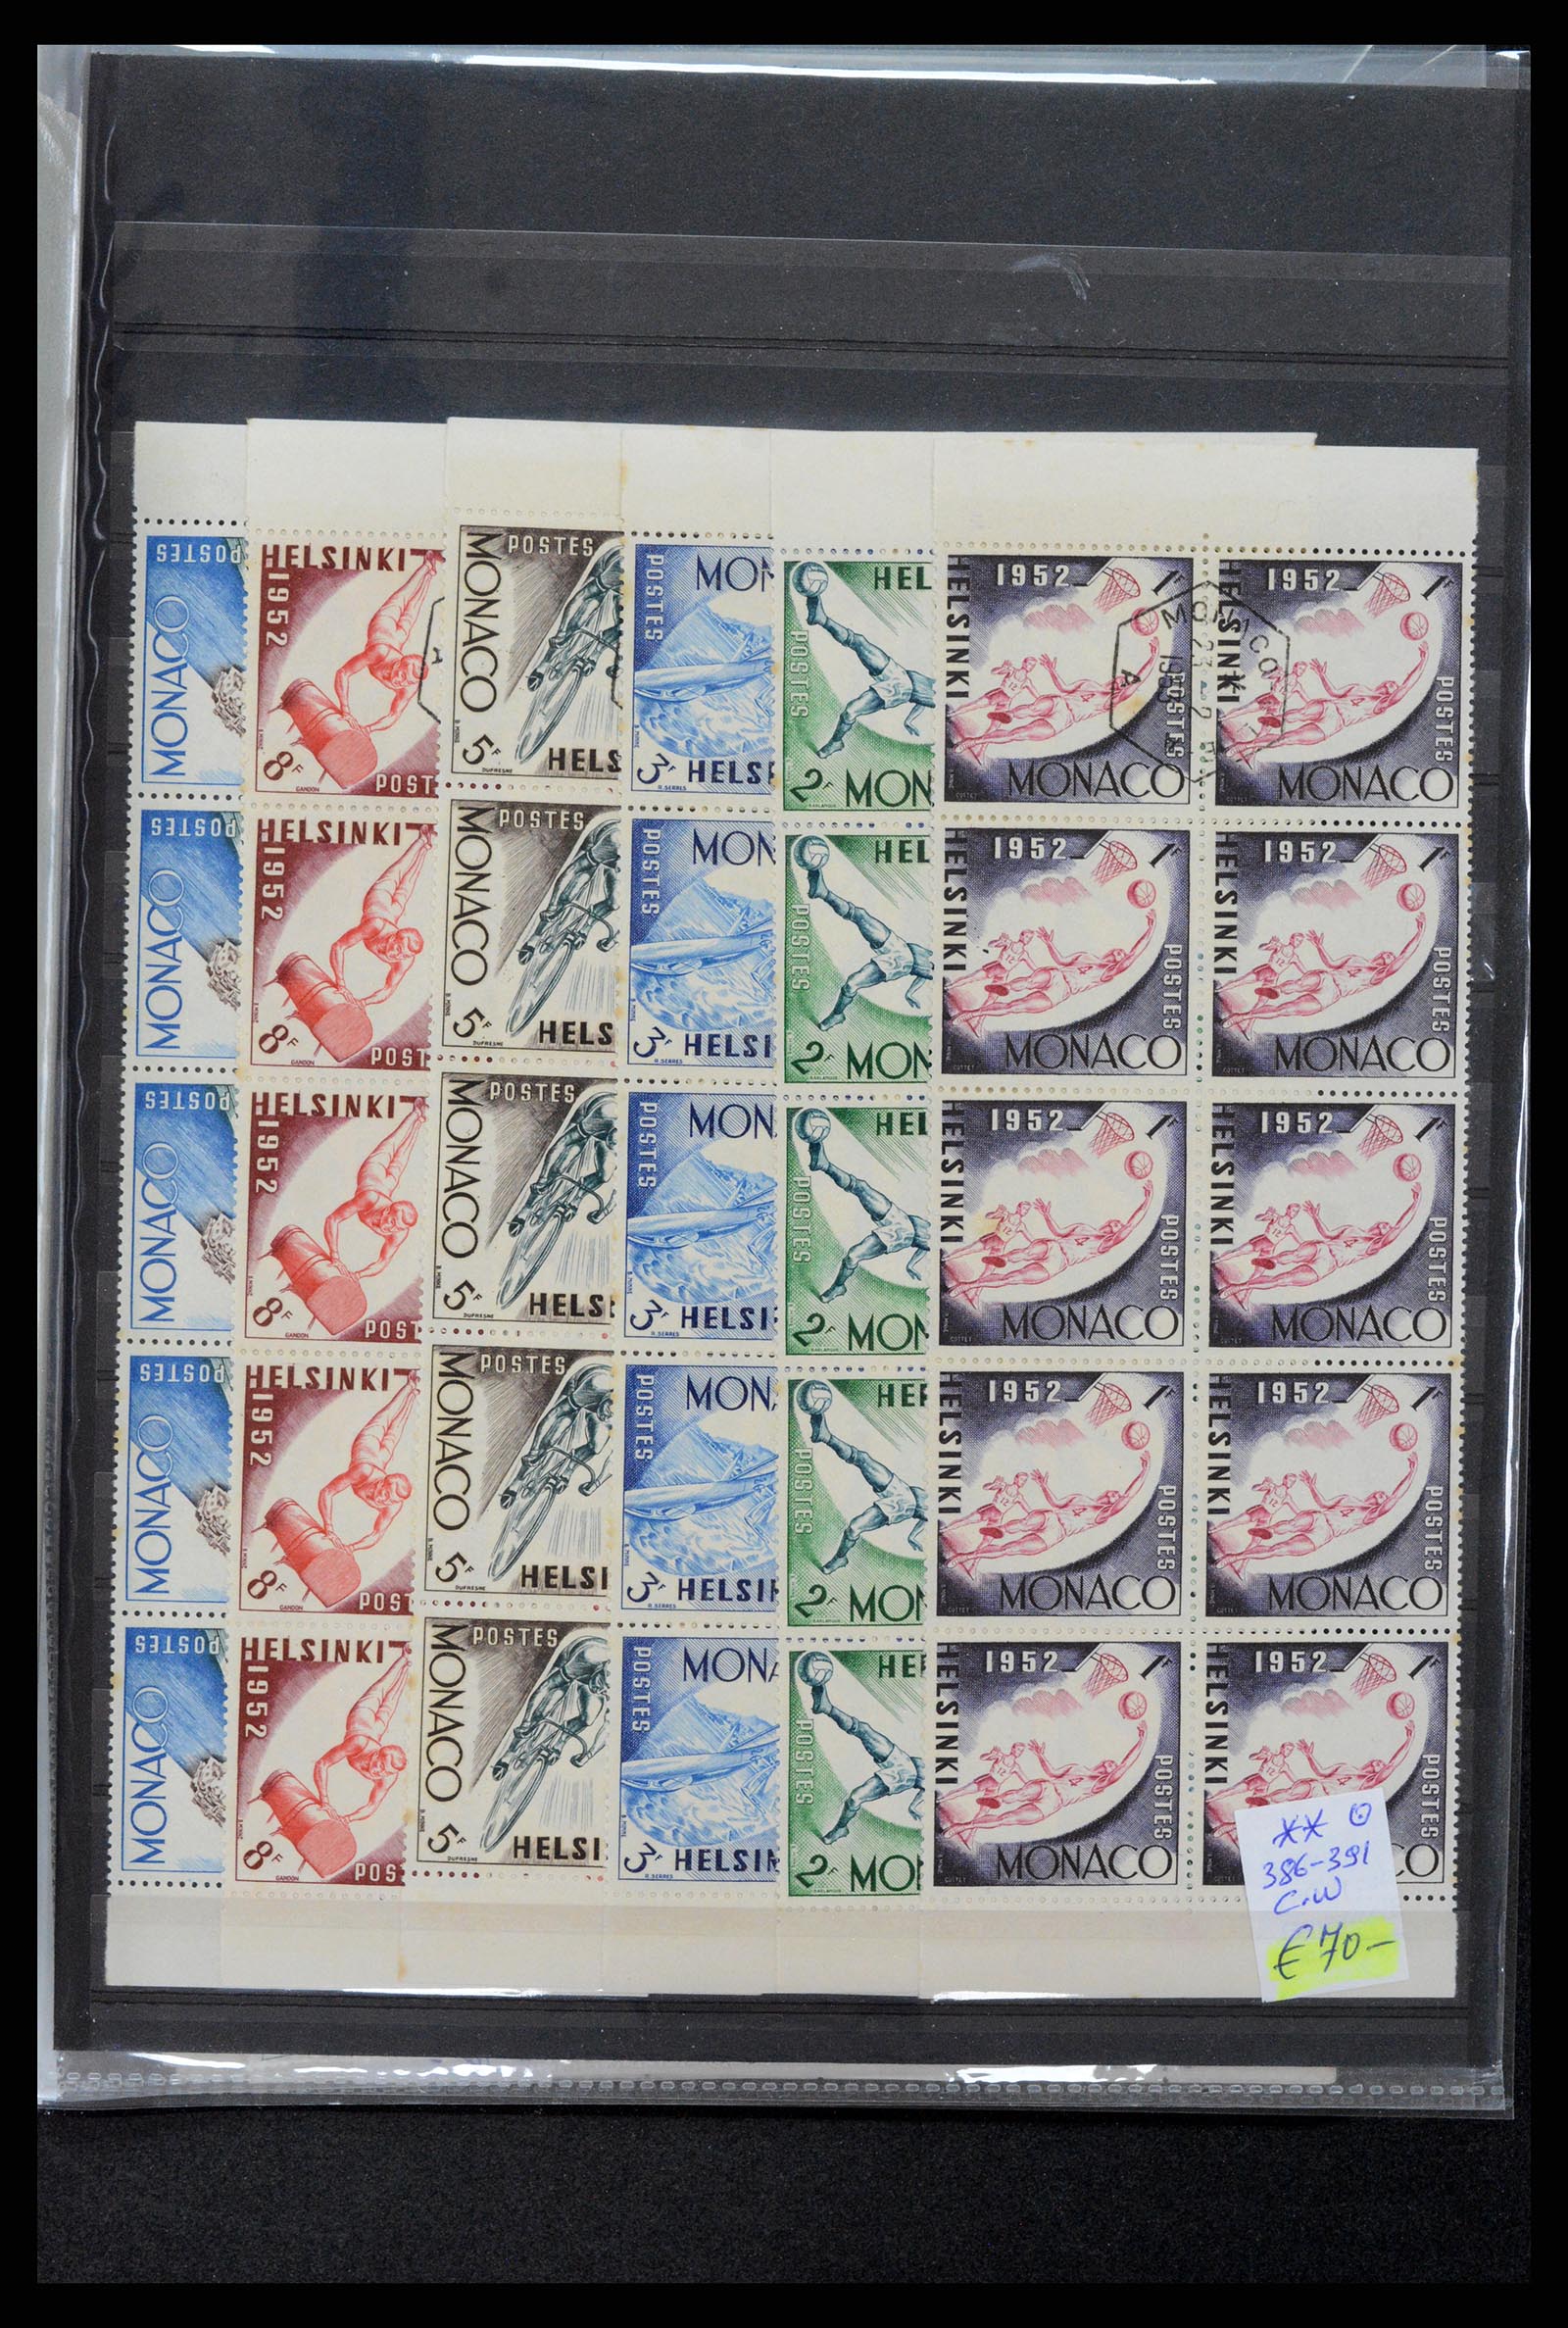 37984 018 - Stamp collection 37984 Monaco better issues 1942-1982.